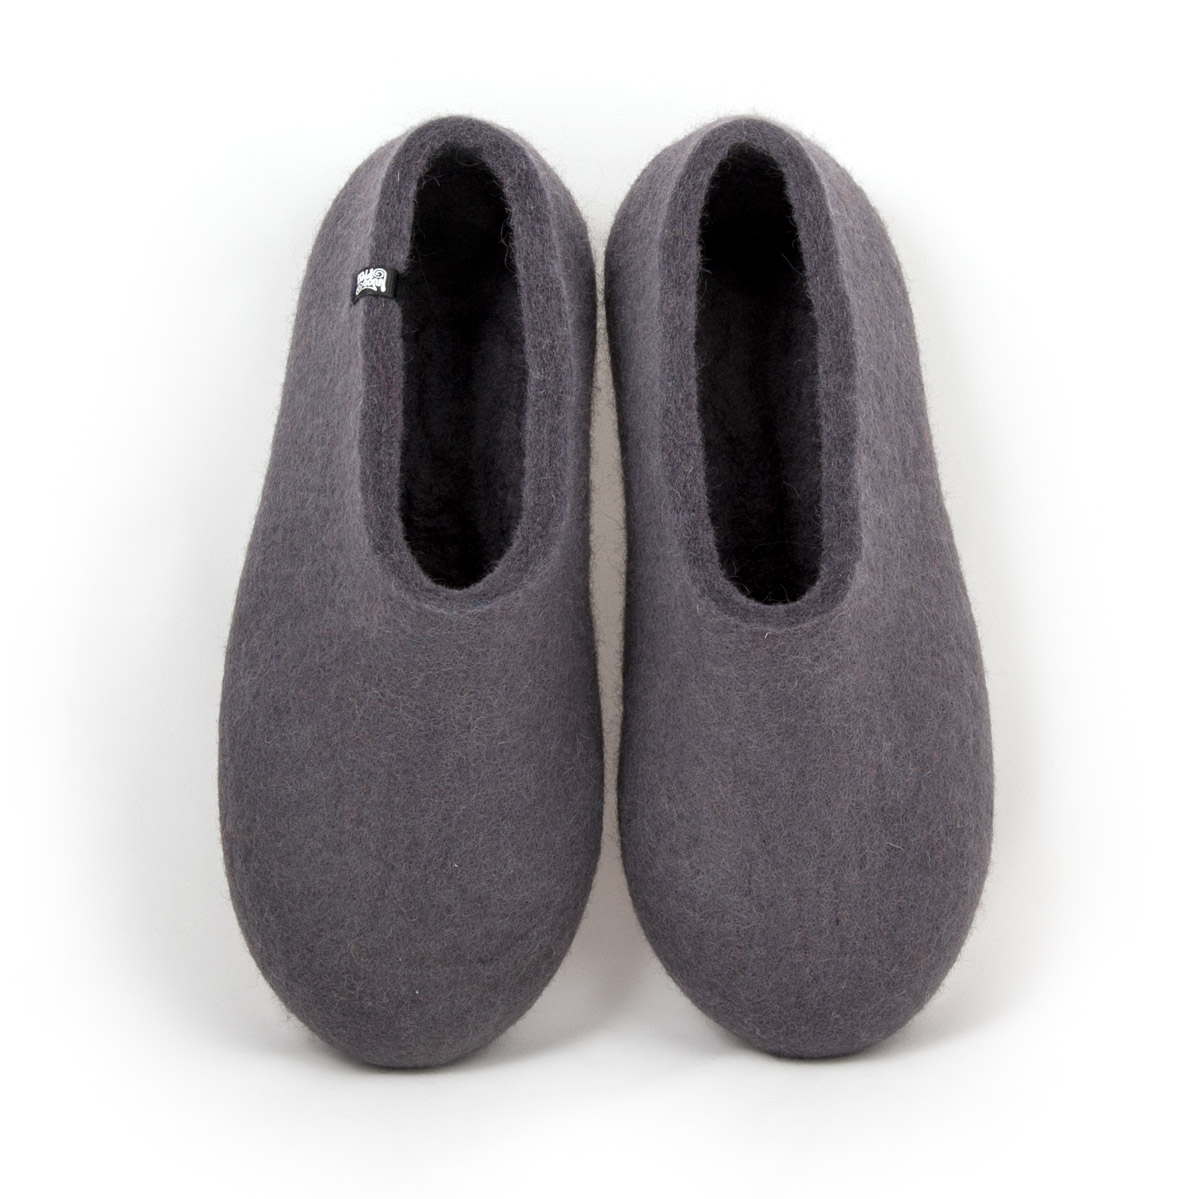 Red felt slippers for men BASIC collection by Wooppers